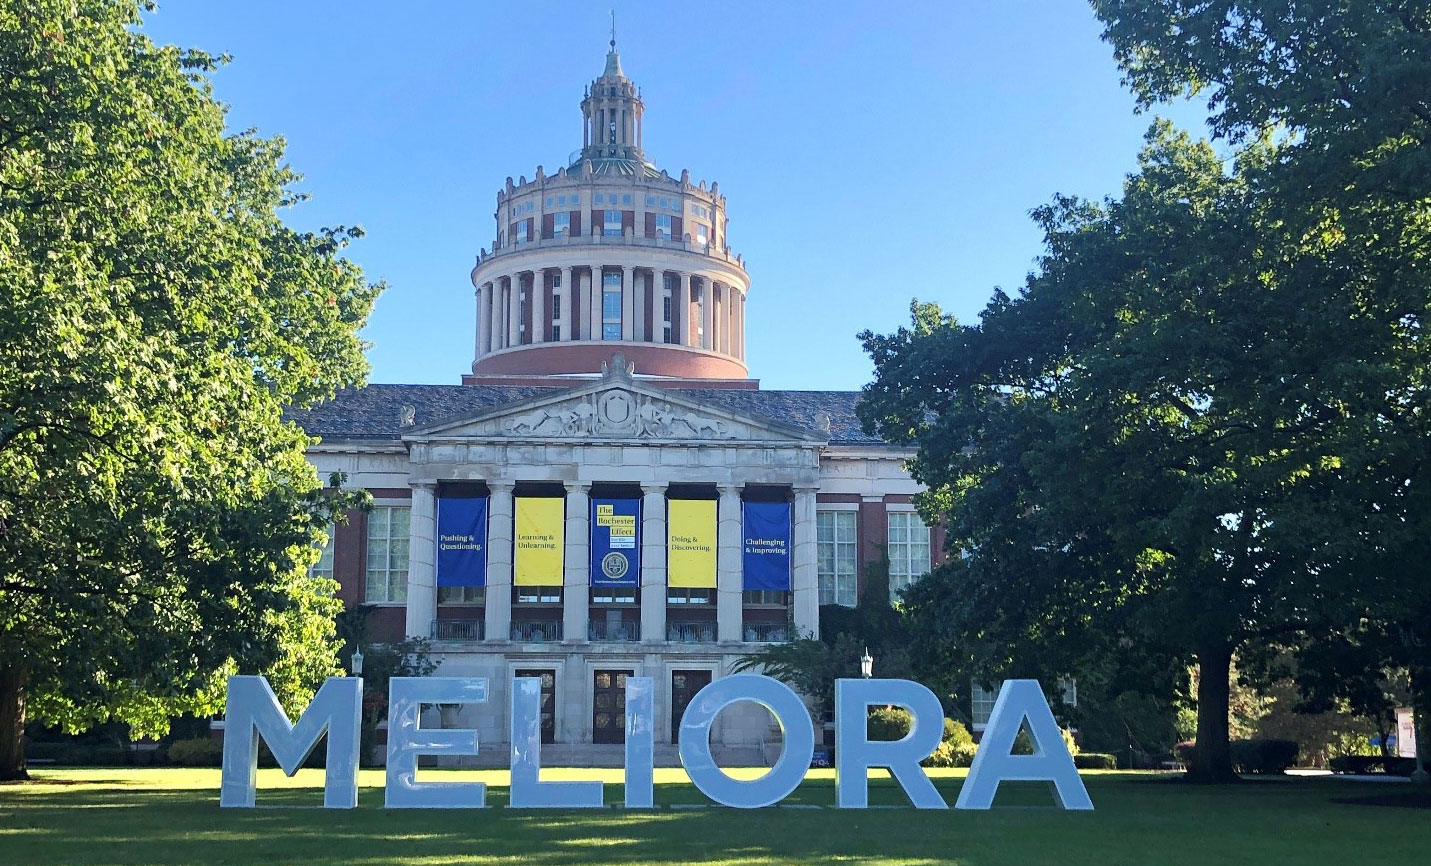 Meliora Sign on Lawn